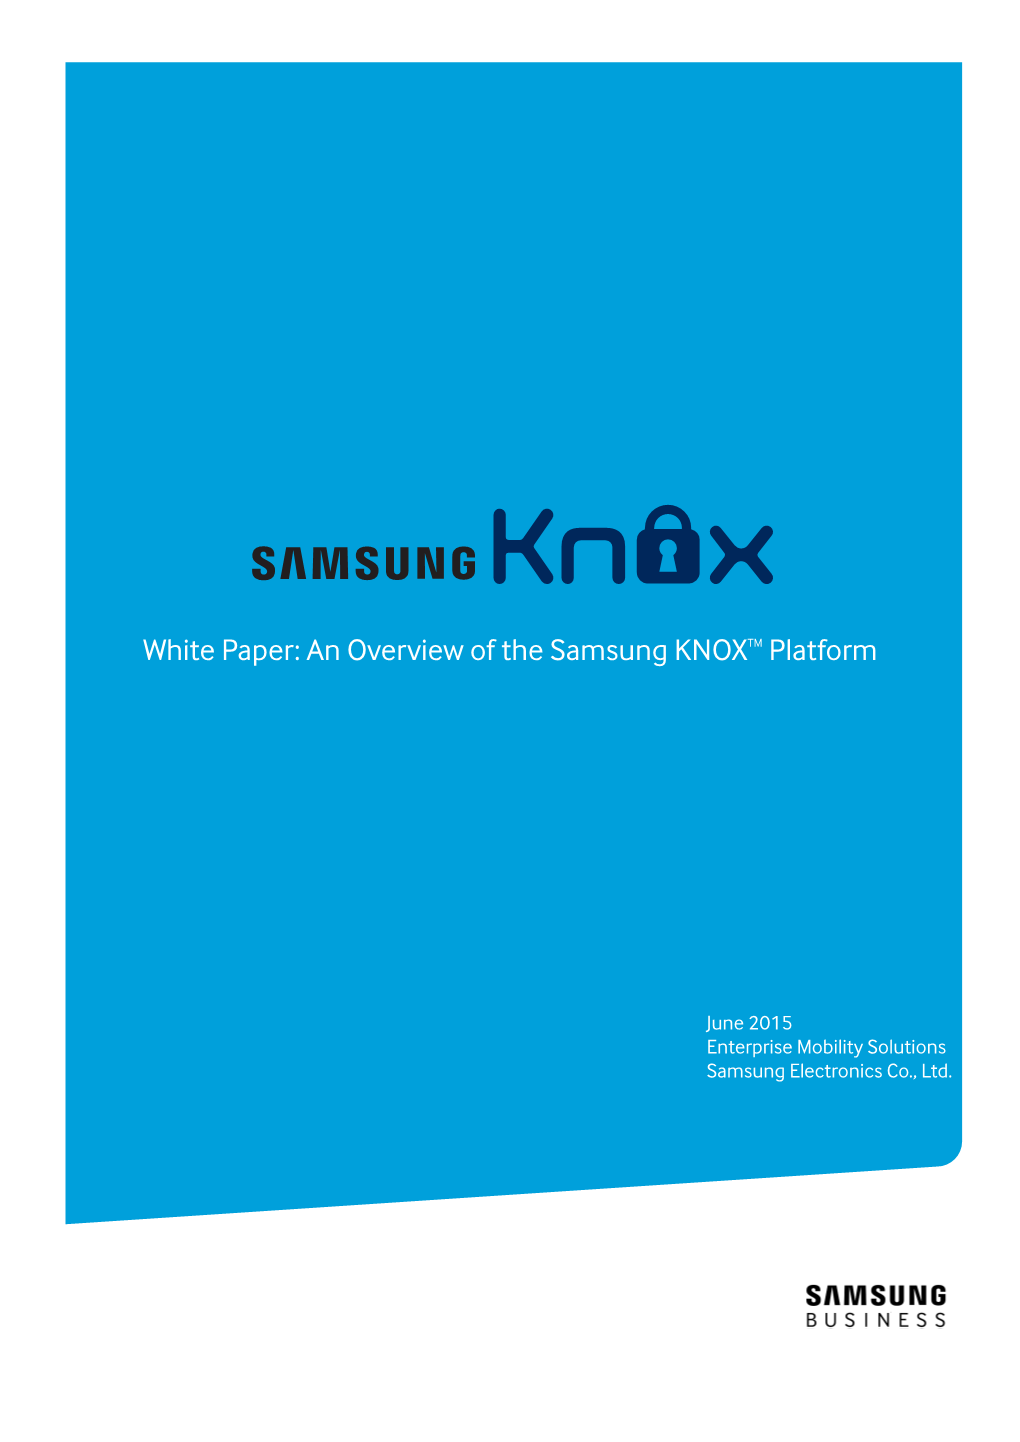 White Paper: an Overview of the Samsung KNOXTM Platform